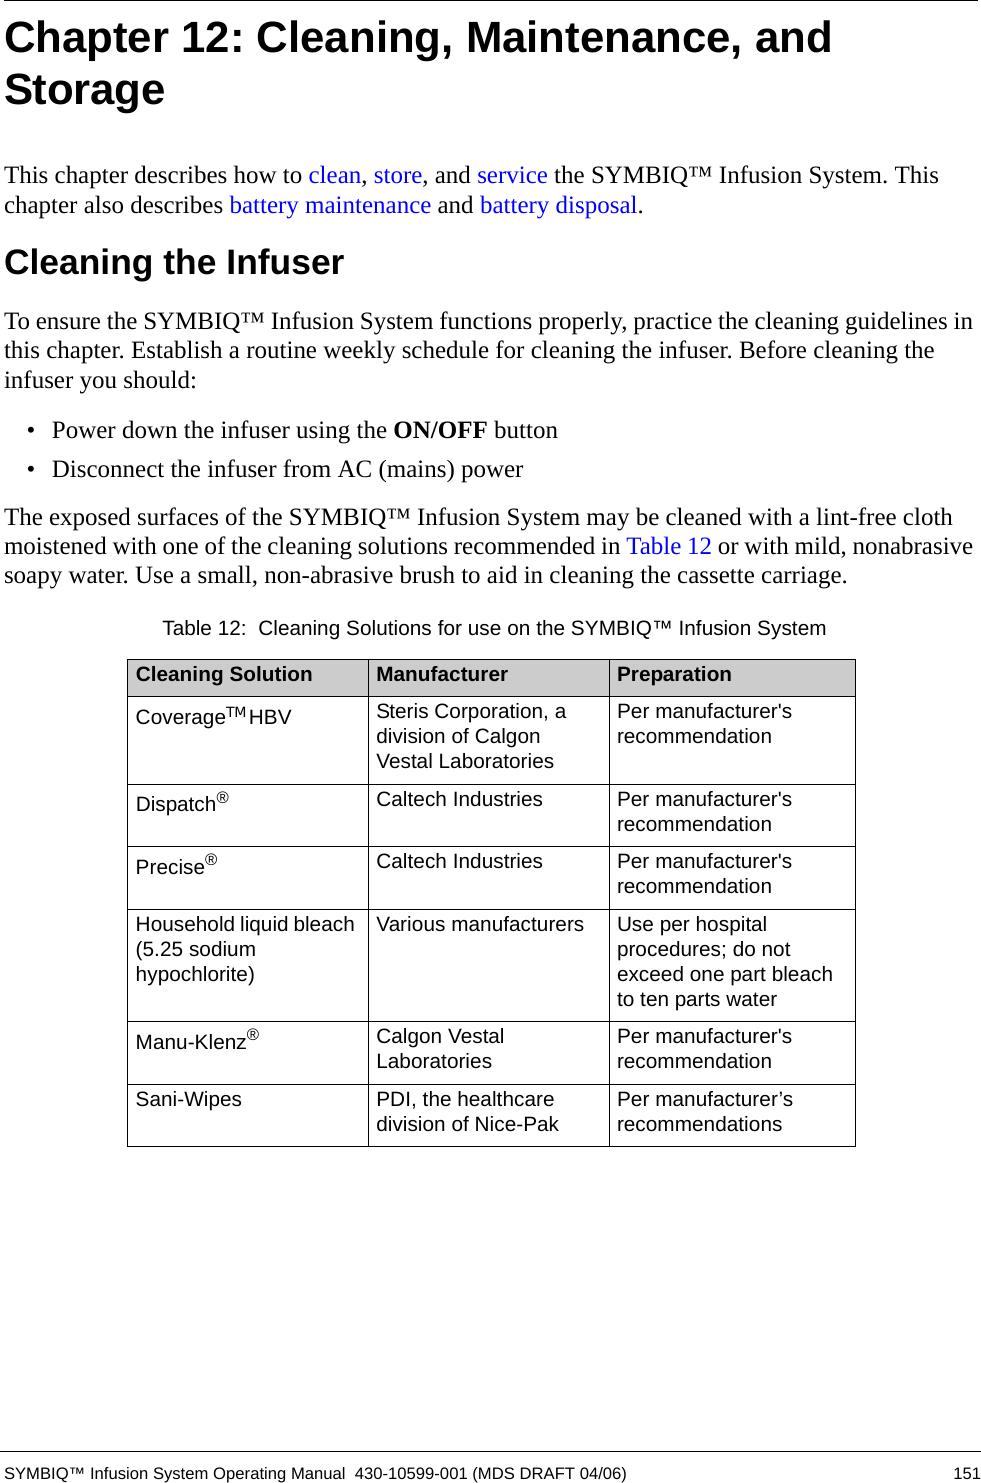  SYMBIQ™ Infusion System Operating Manual  430-10599-001 (MDS DRAFT 04/06) 151Chapter 12: Cleaning, Maintenance, and StorageThis chapter describes how to clean, store, and service the SYMBIQ™ Infusion System. This chapter also describes battery maintenance and battery disposal.Cleaning the InfuserTo ensure the SYMBIQ™ Infusion System functions properly, practice the cleaning guidelines in this chapter. Establish a routine weekly schedule for cleaning the infuser. Before cleaning the infuser you should:• Power down the infuser using the ON/OFF button• Disconnect the infuser from AC (mains) powerThe exposed surfaces of the SYMBIQ™ Infusion System may be cleaned with a lint-free cloth moistened with one of the cleaning solutions recommended in Table 12 or with mild, nonabrasive soapy water. Use a small, non-abrasive brush to aid in cleaning the cassette carriage.   Table 12:  Cleaning Solutions for use on the SYMBIQ™ Infusion SystemCleaning Solution Manufacturer PreparationCoverageTM HBV Steris Corporation, a division of Calgon Vestal LaboratoriesPer manufacturer&apos;s recommendationDispatch®Caltech Industries Per manufacturer&apos;s recommendationPrecise®Caltech Industries Per manufacturer&apos;s recommendationHousehold liquid bleach (5.25 sodium hypochlorite)Various manufacturers Use per hospital procedures; do not exceed one part bleach to ten parts waterManu-Klenz®Calgon Vestal Laboratories Per manufacturer&apos;s recommendationSani-Wipes PDI, the healthcare division of Nice-Pak Per manufacturer’s recommendations